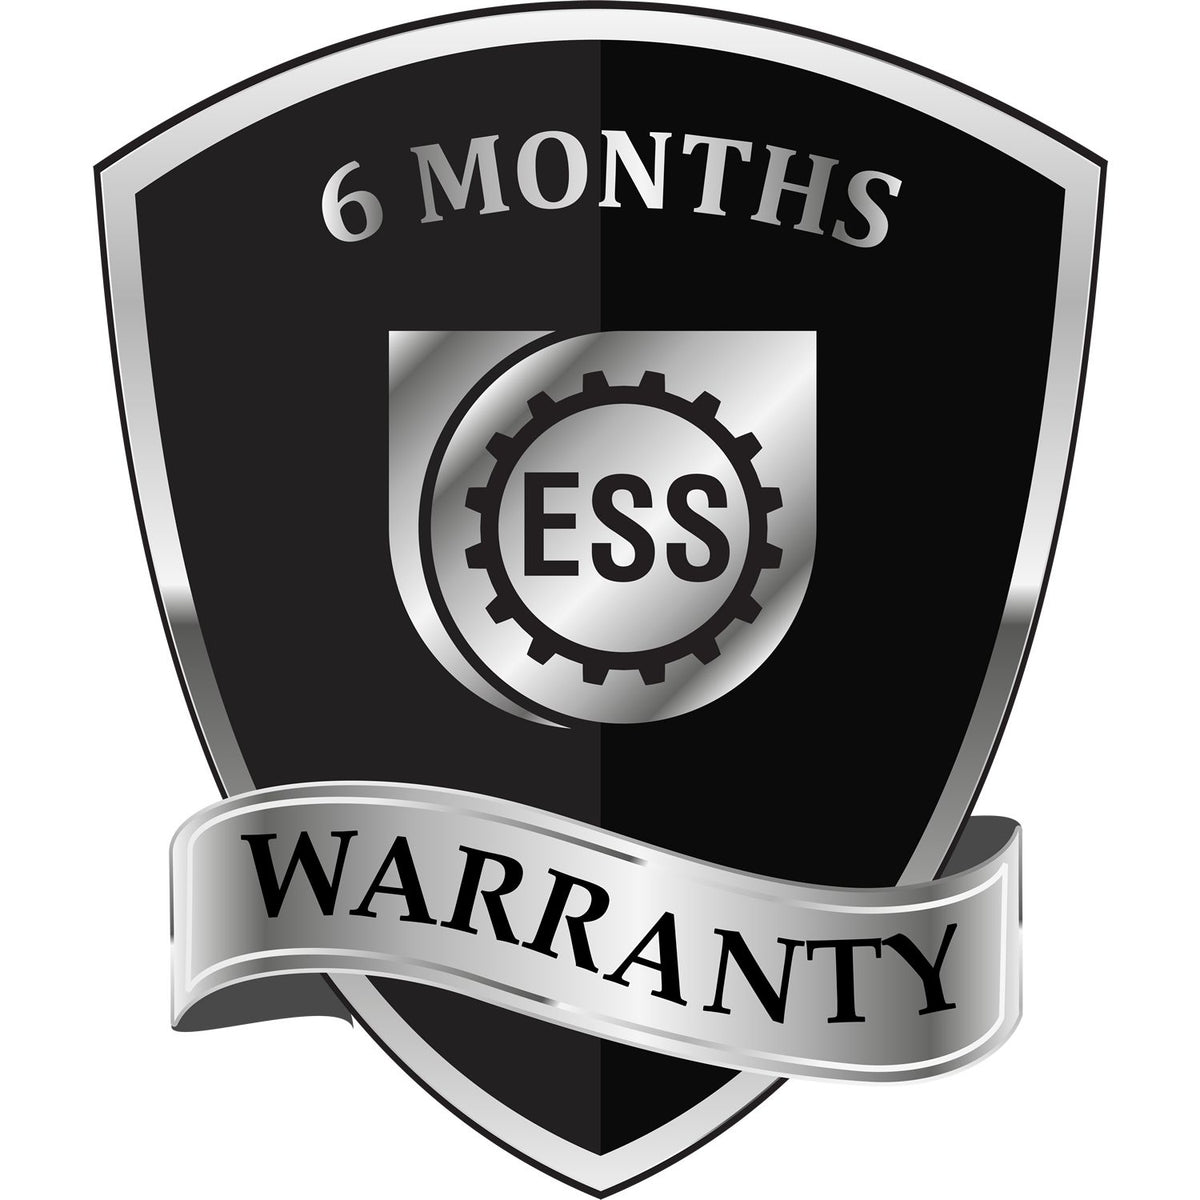 A badge or emblem showing a warranty icon for the Slim Pre-Inked New Jersey Architect Seal Stamp